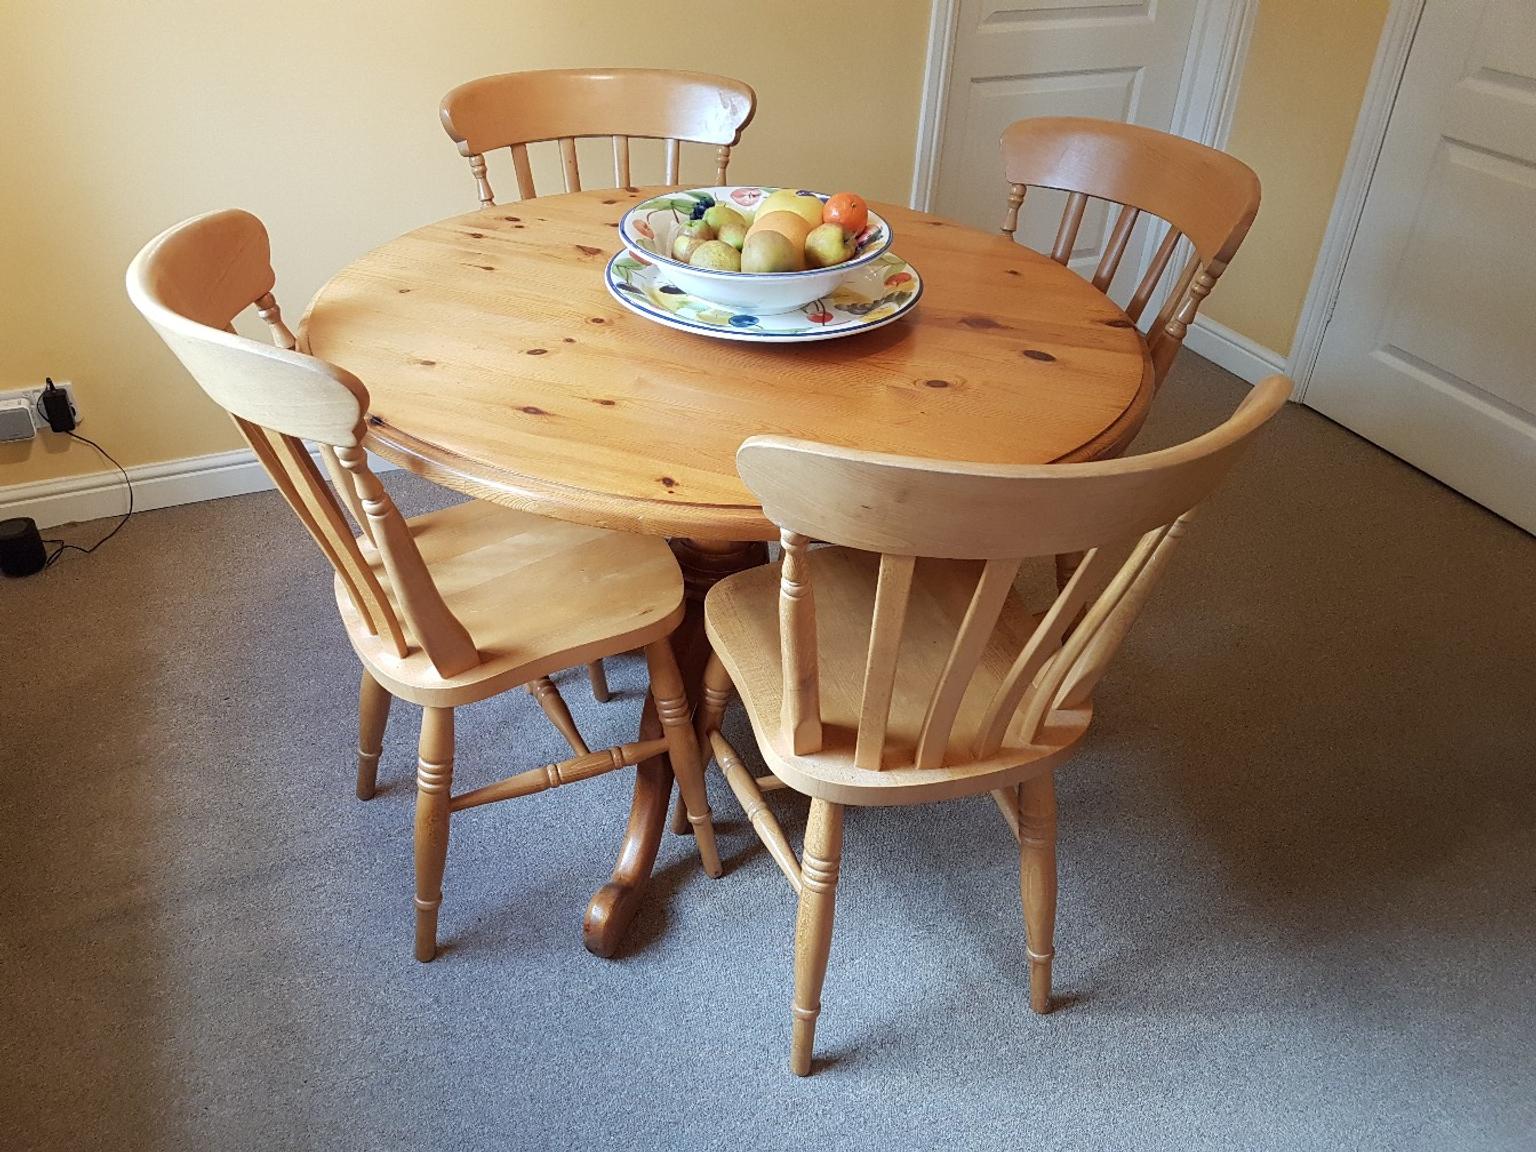 Round Pine Table And Chairs In Pr7, Pine Round Table And Chairs For Kitchen